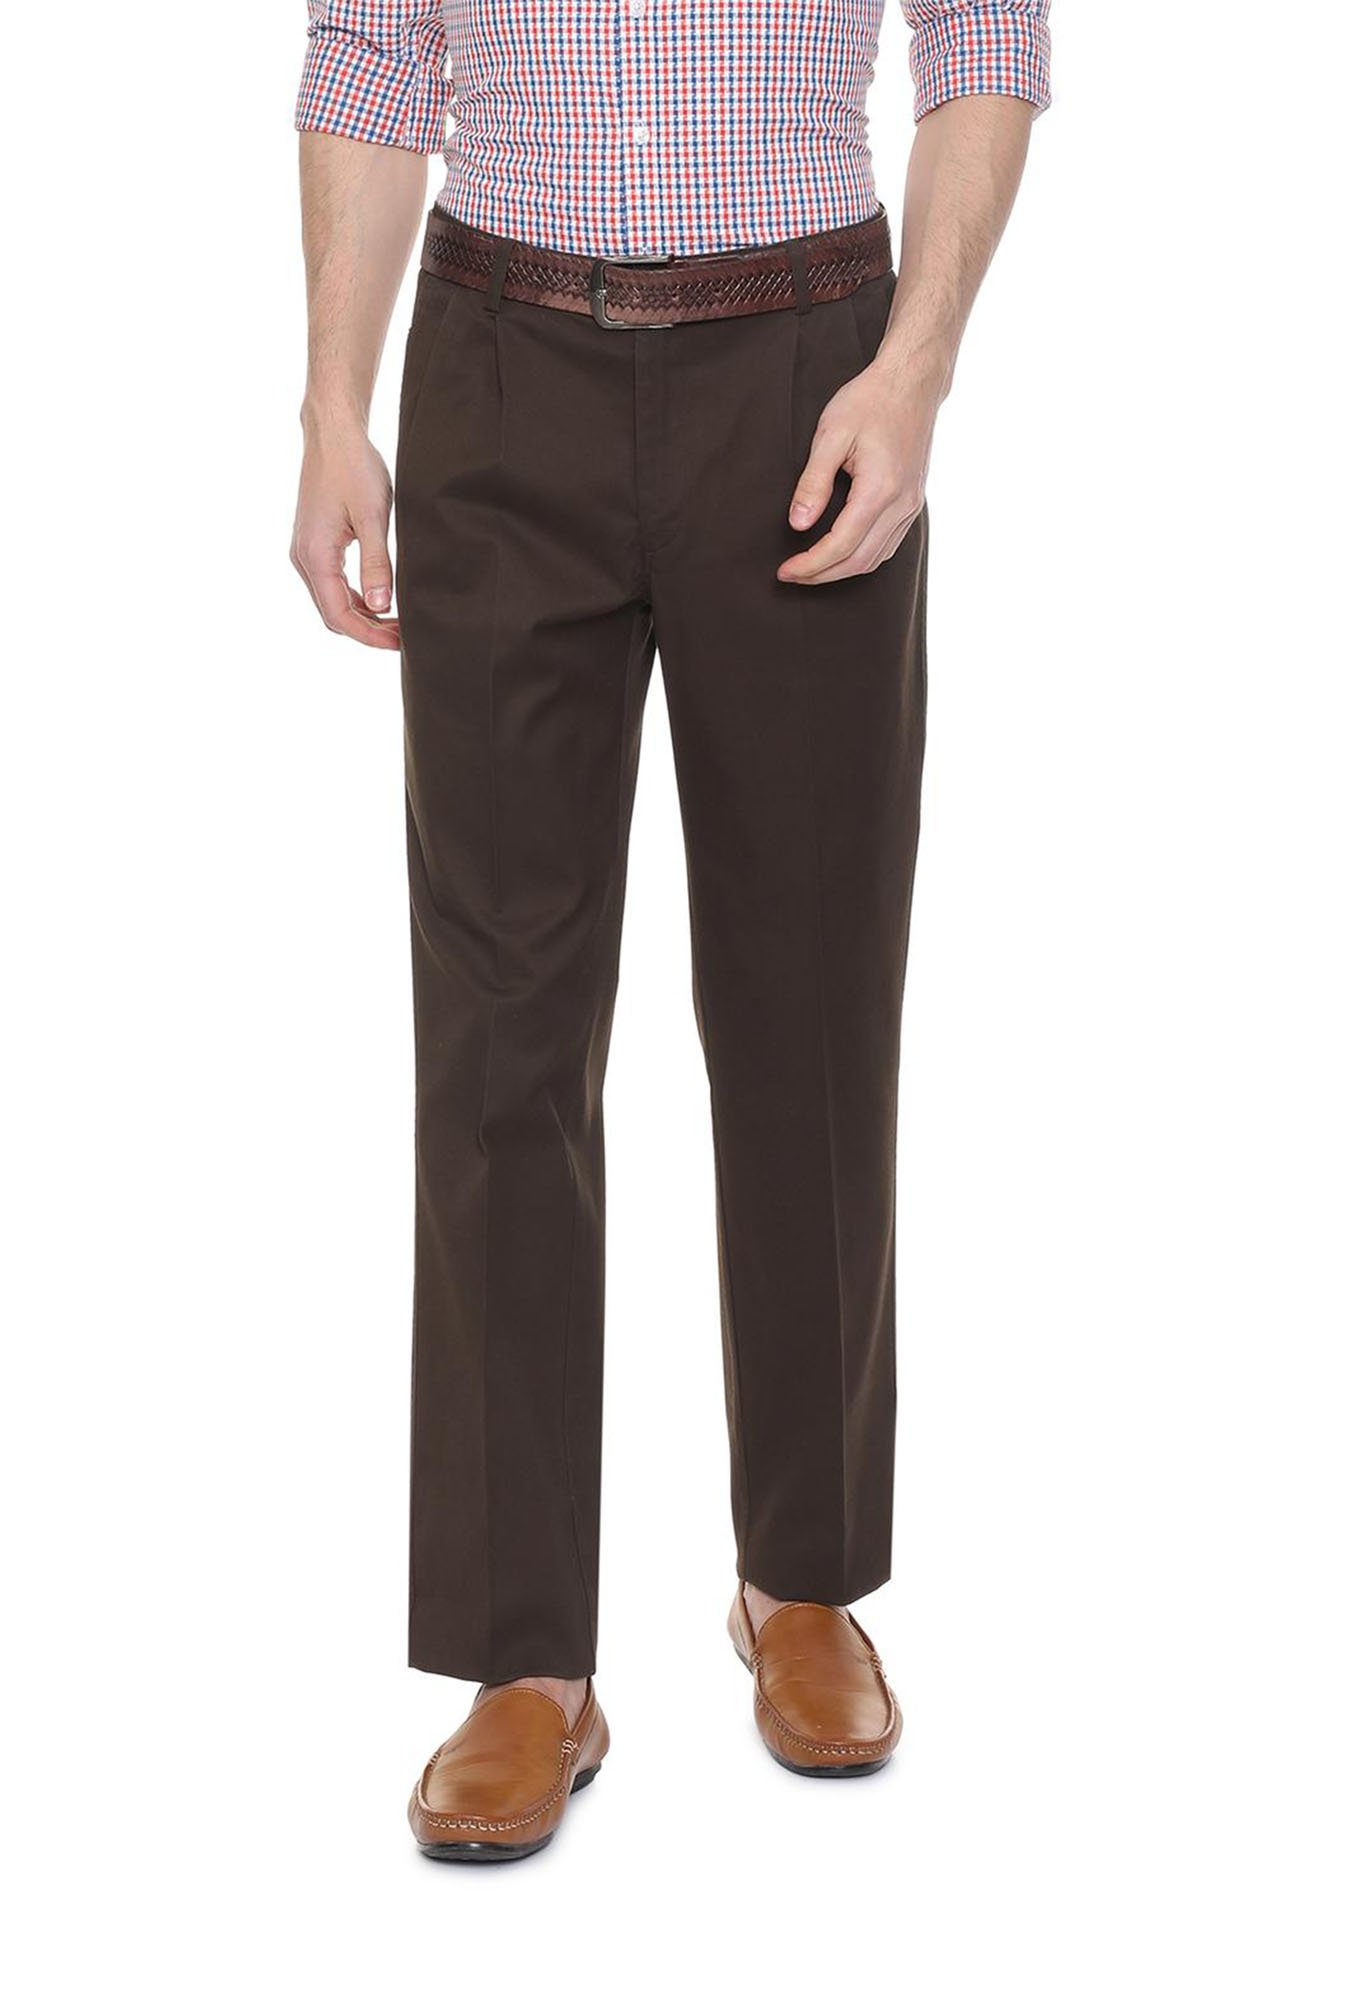 Buy Olive Trousers & Pants for Men by ALLEN SOLLY Online | Ajio.com